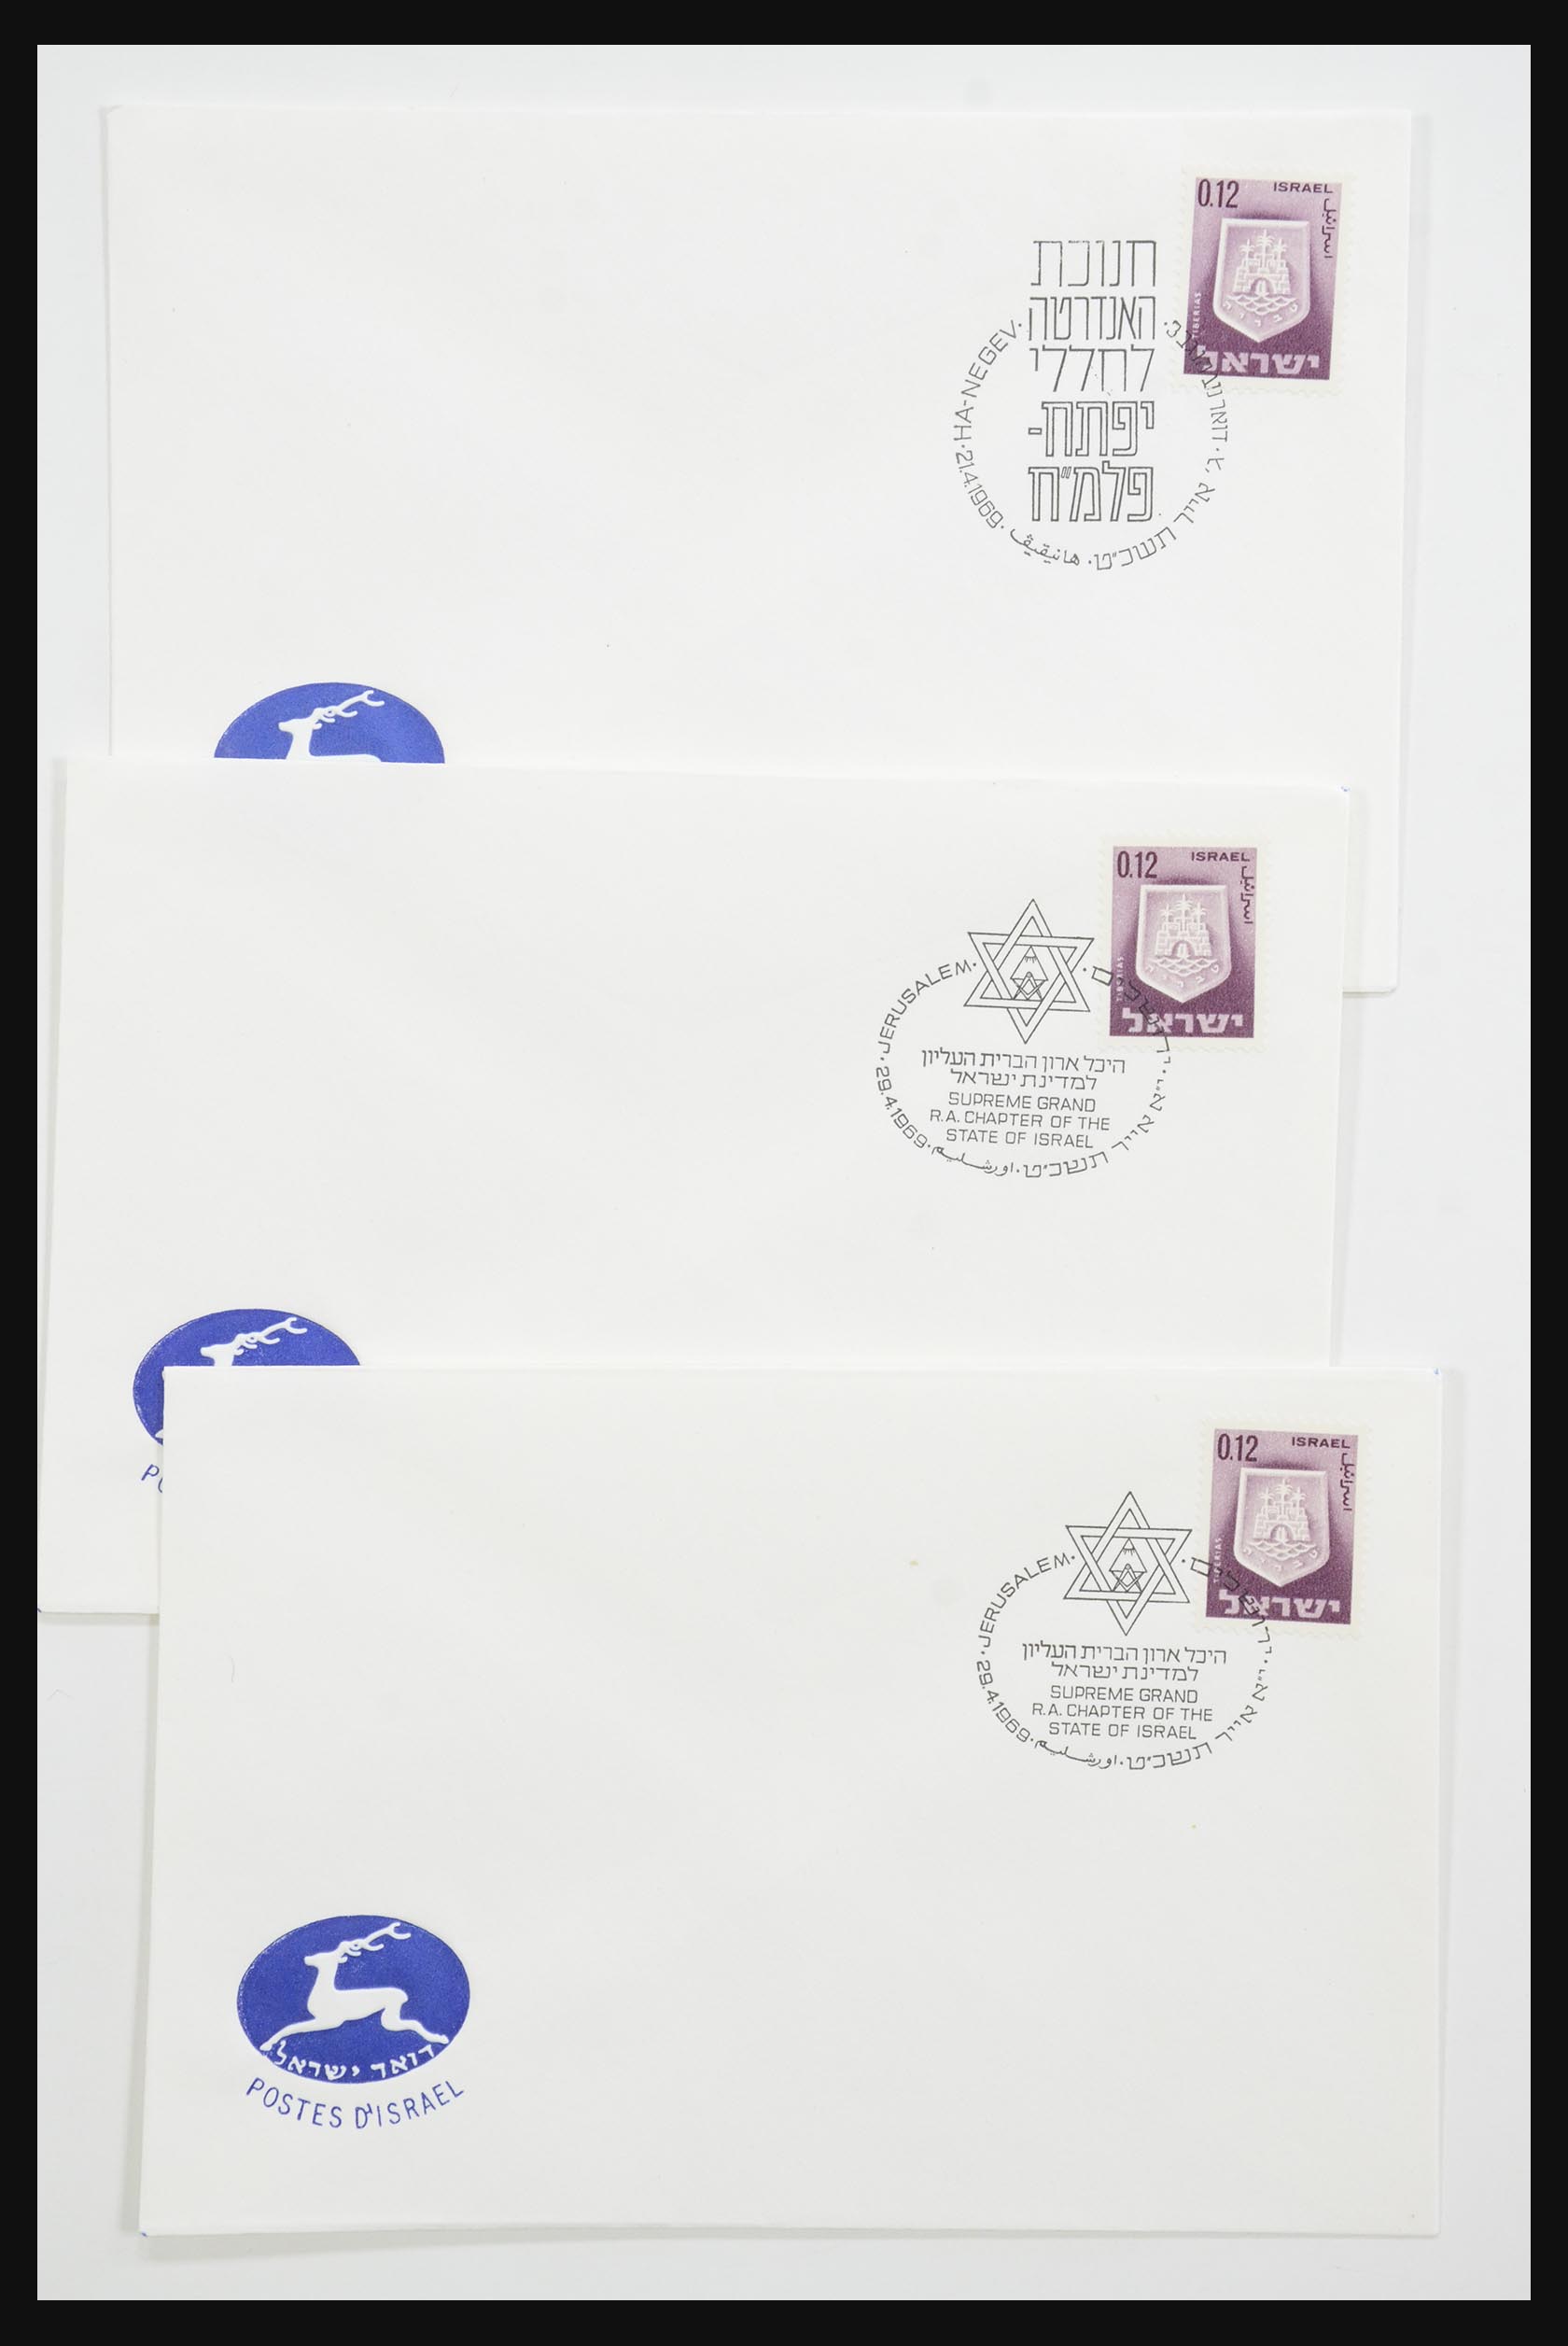 31924 098 - 31924 Israel first day cover collection 1957-2003.